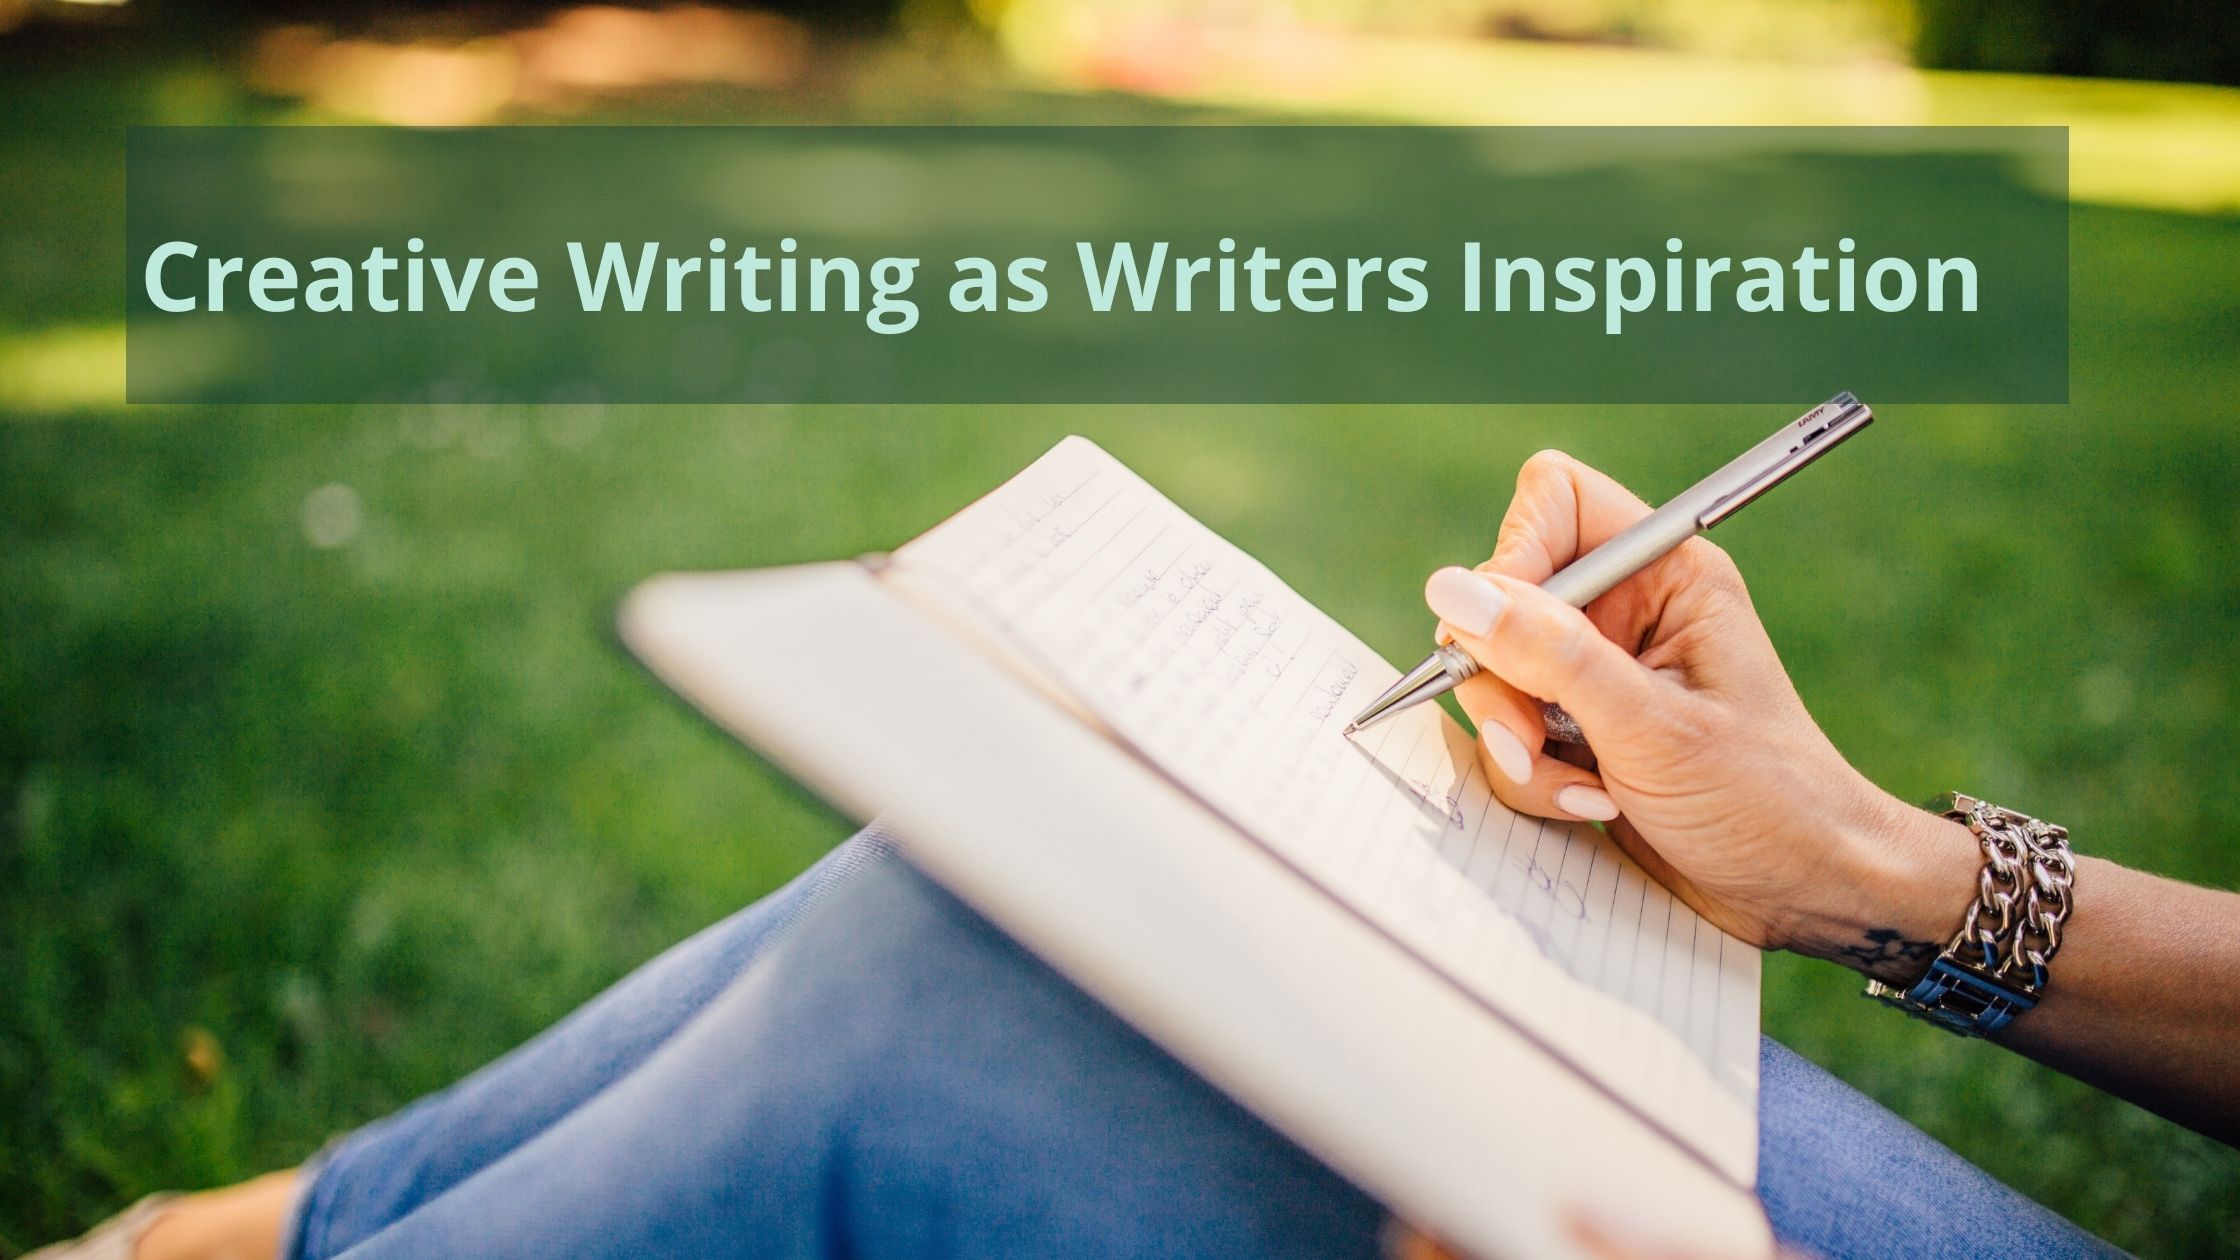 creative writers can gain inspiration by researching information and